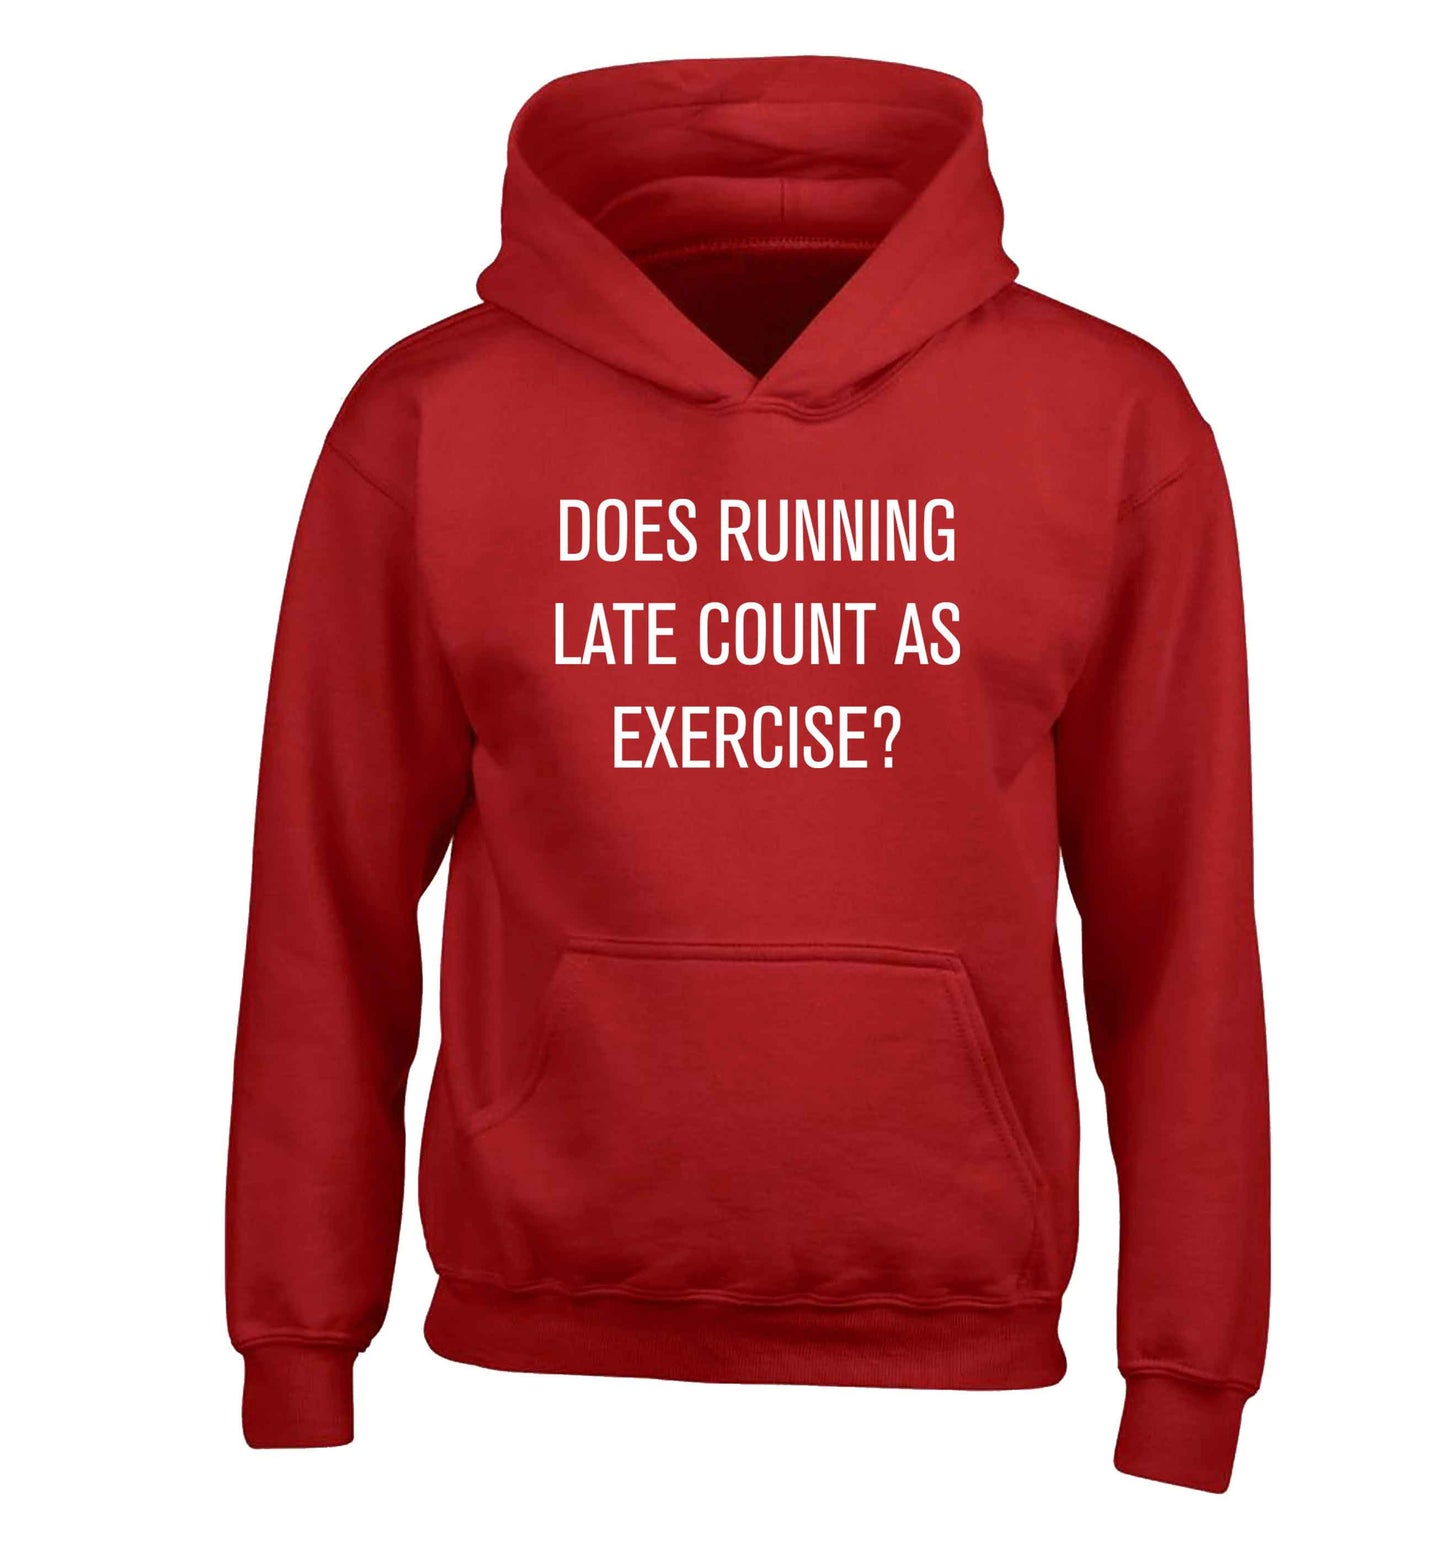 Does running late count as exercise? children's red hoodie 12-13 Years